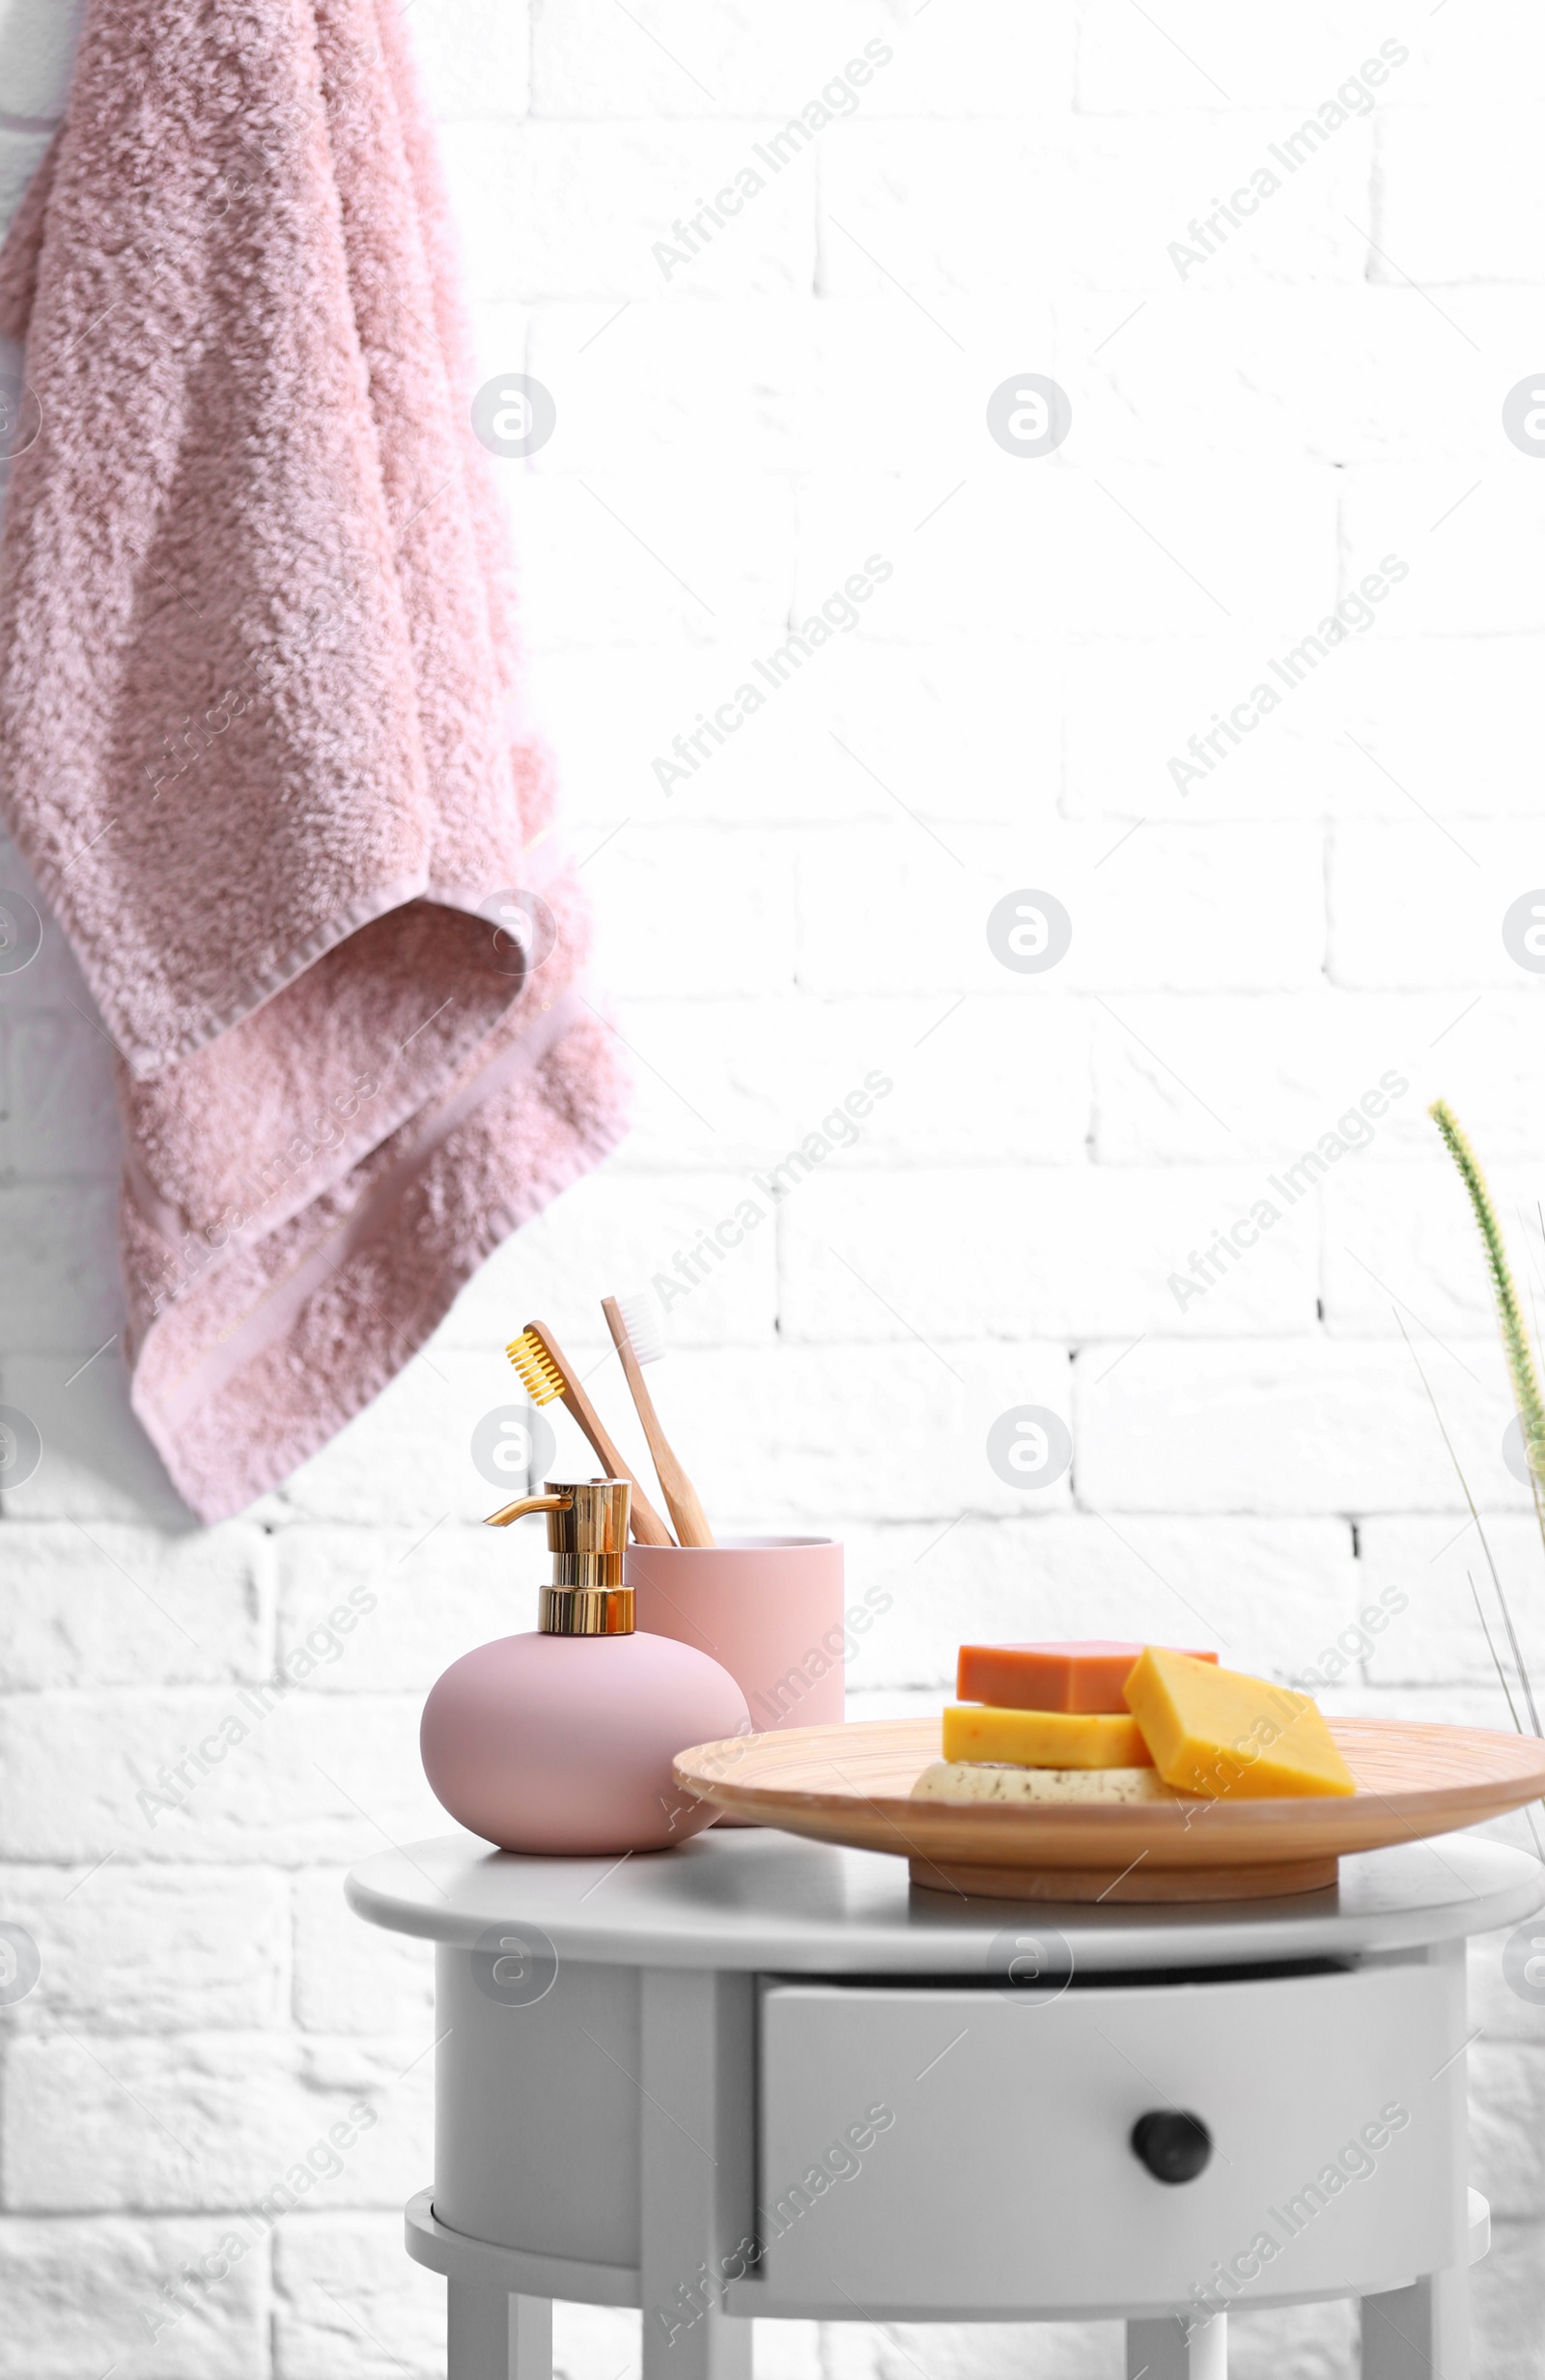 Photo of Soap bars, shampoo and toiletries on table in bathroom. Space for text